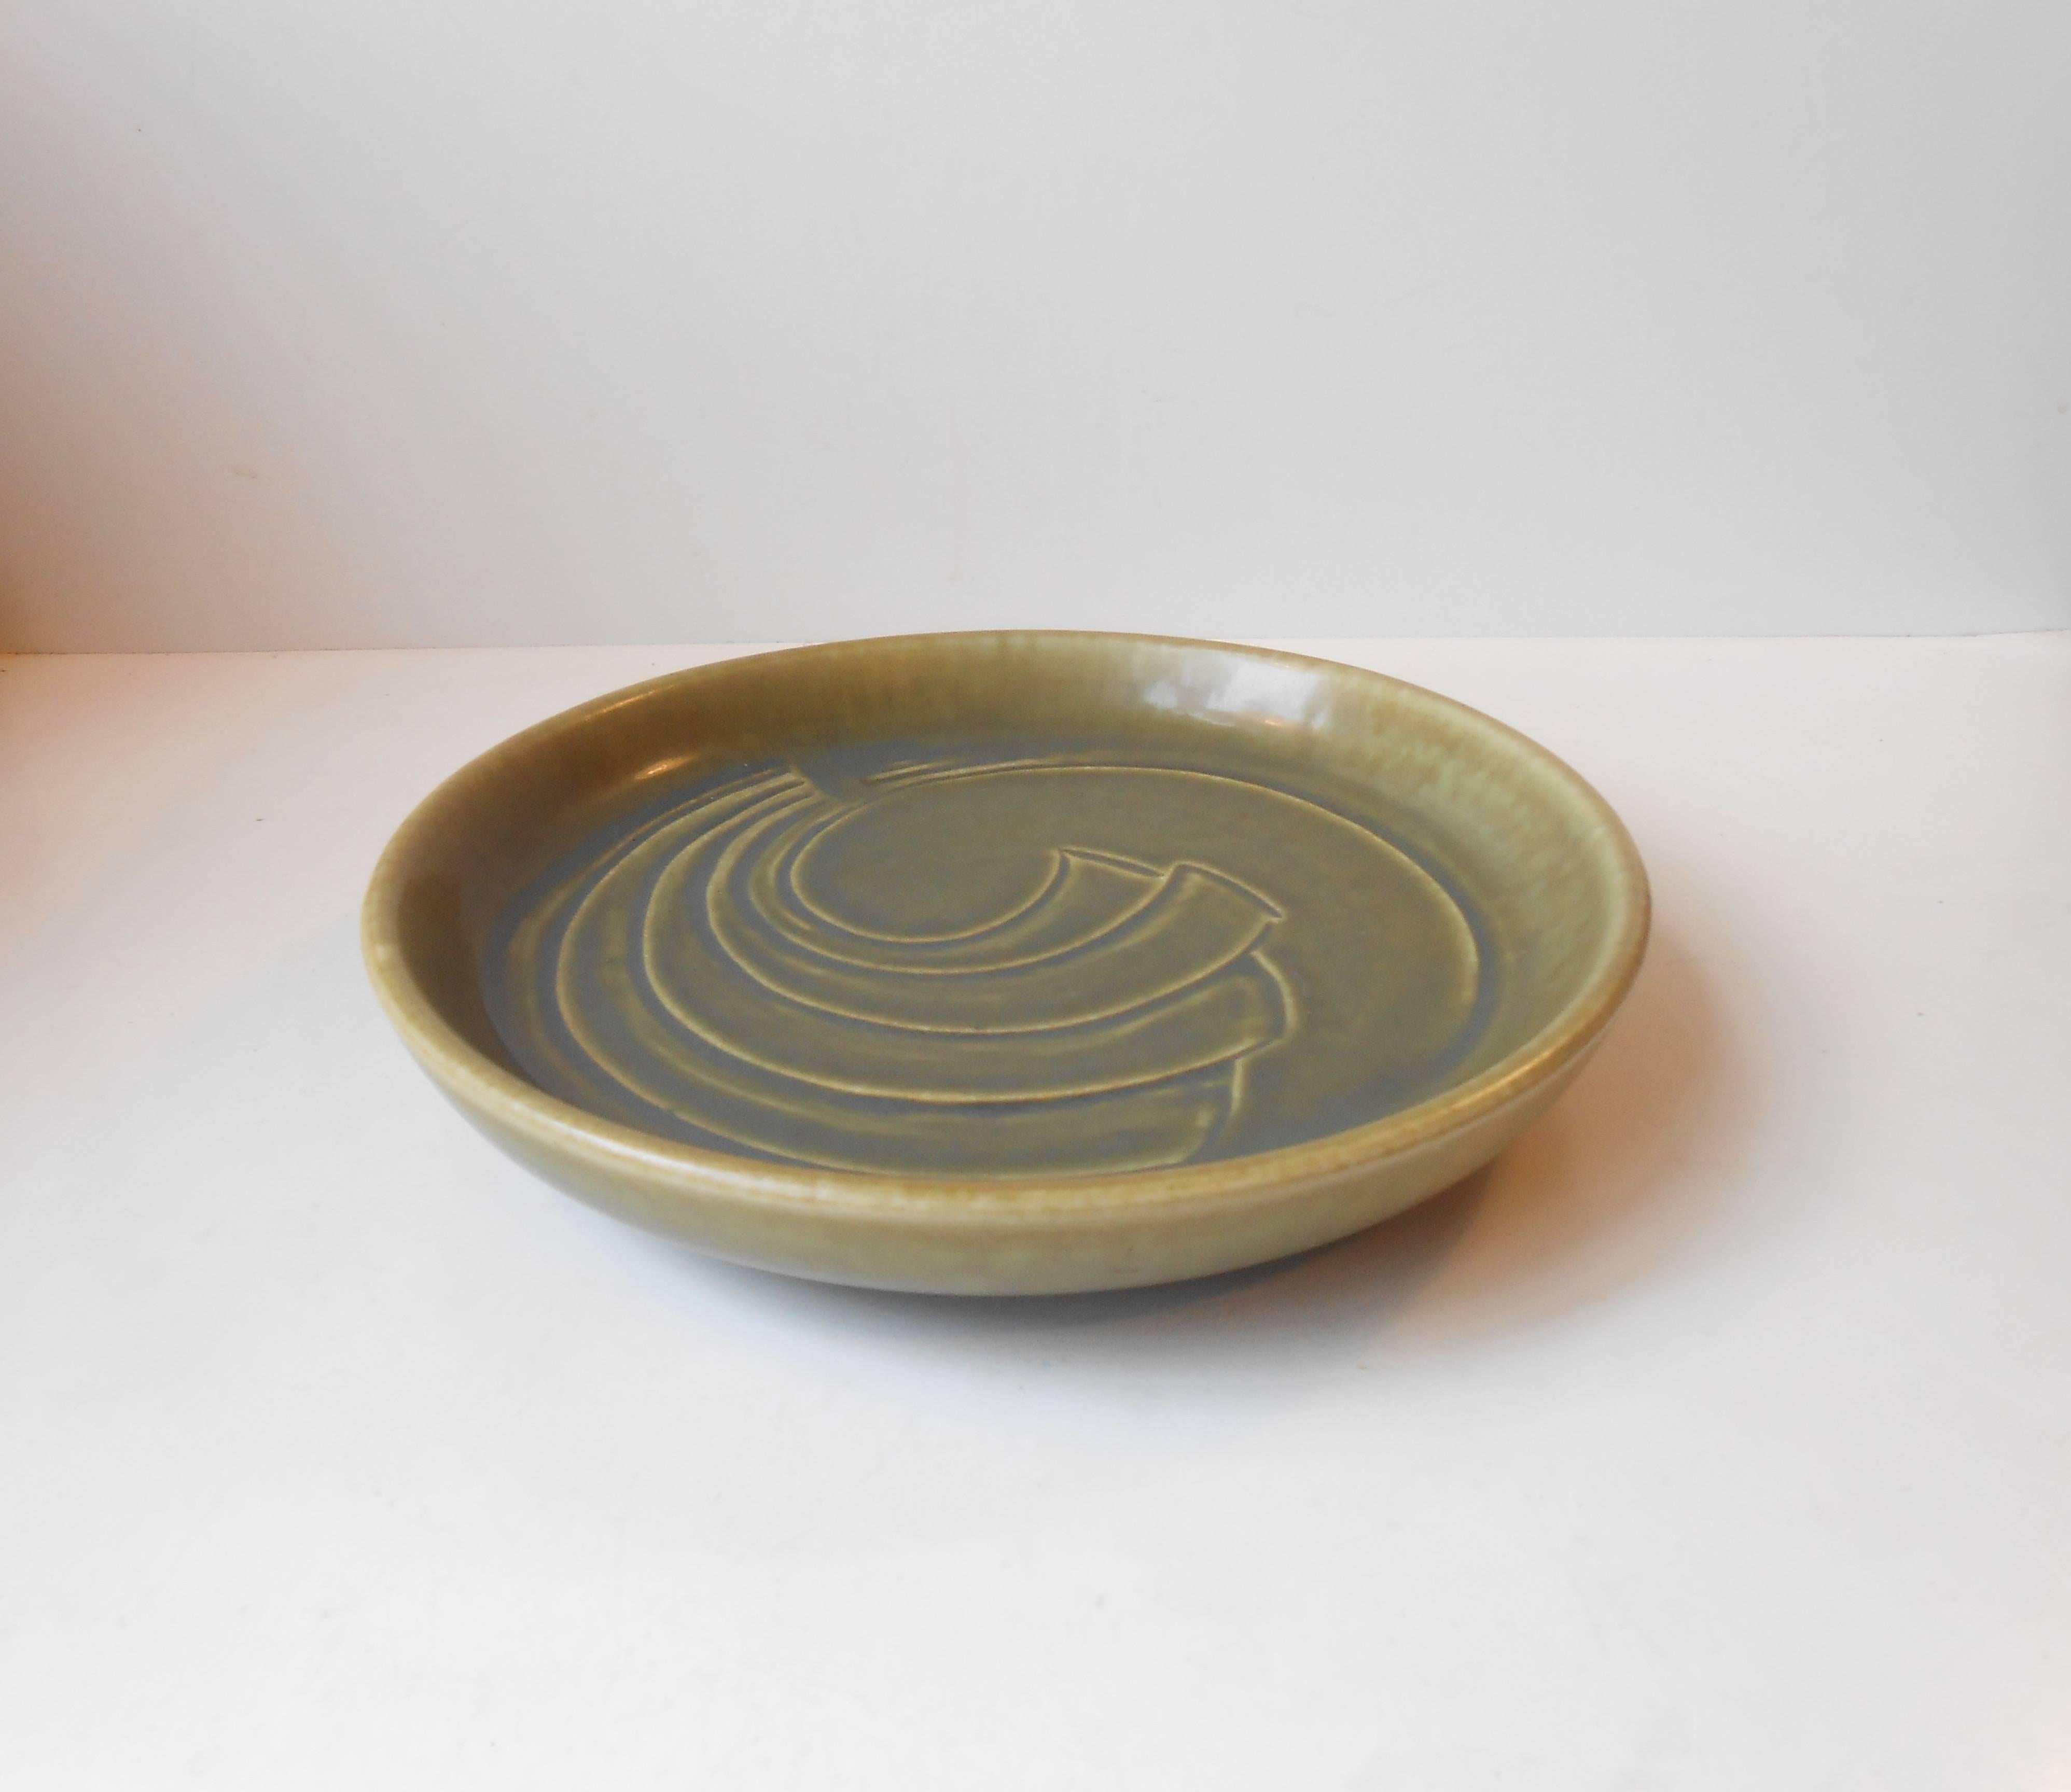 Wide poche dish by E. ST. N for Saxbo, Denmark. Delicate light-green harefur glaze and incised modernistic center-motif'. Measurements: D 26.5 cm (10.35 inches), H 5 cm (2 inches). Condition: Mint!